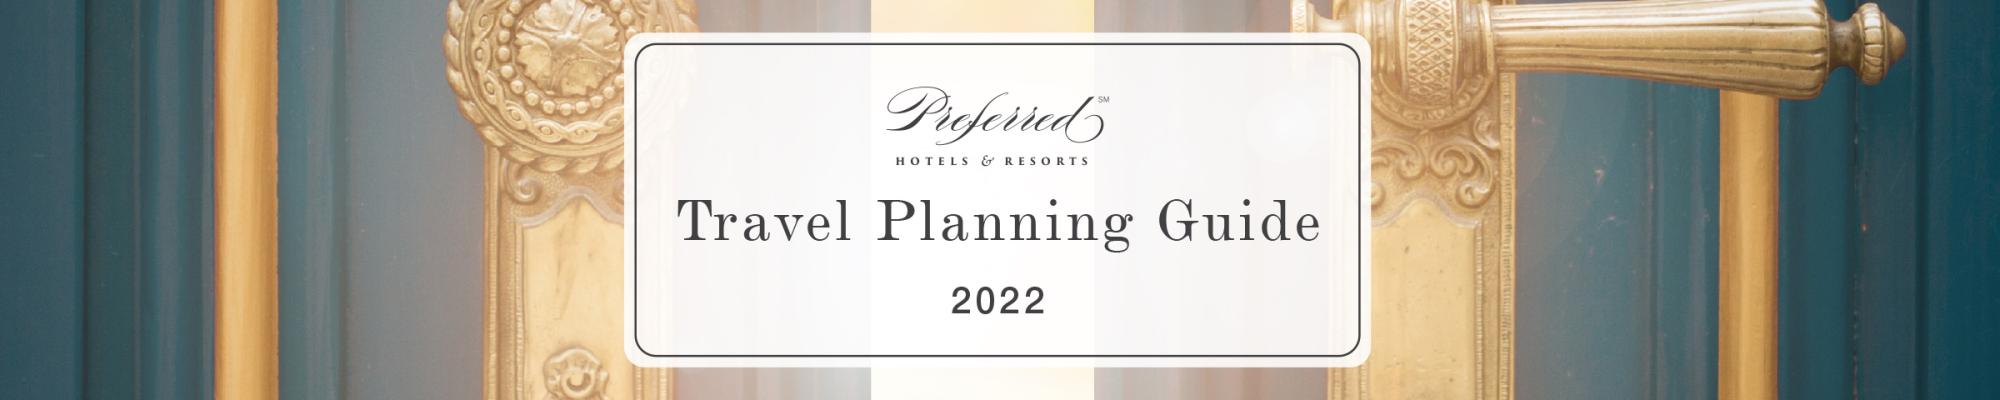 2022 Travel Planning Guide